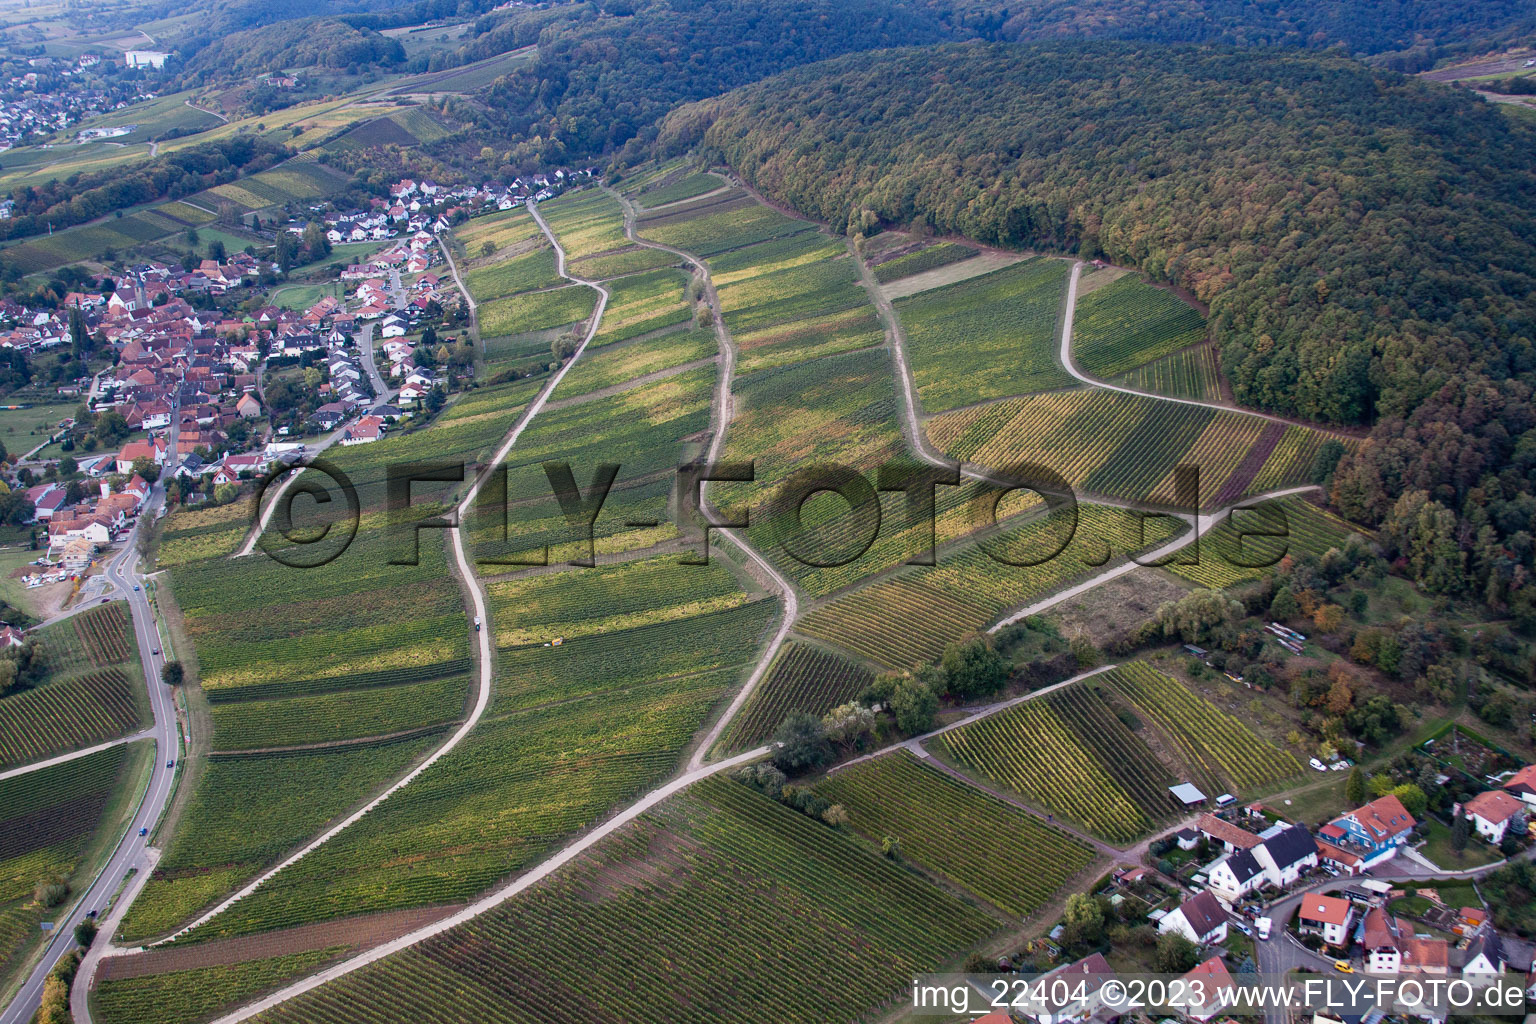 Aerial view of District Pleisweiler in Pleisweiler-Oberhofen in the state Rhineland-Palatinate, Germany